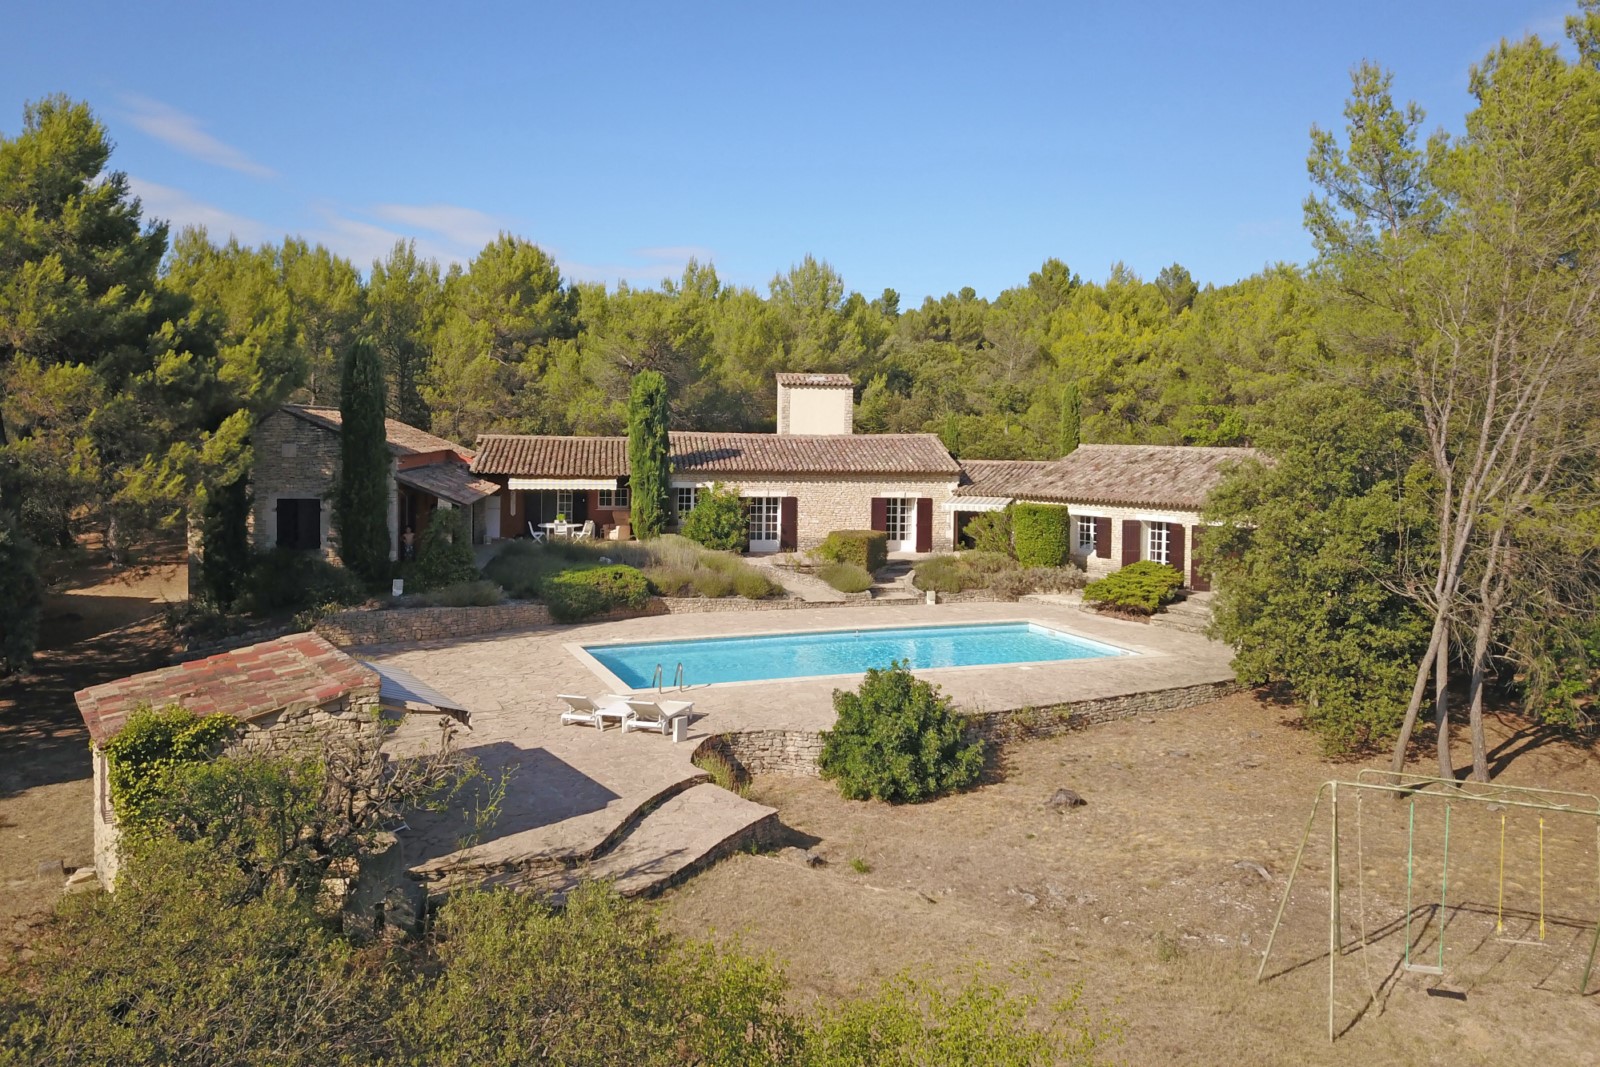 Luberon : Villa on one level with pool and outbuildings